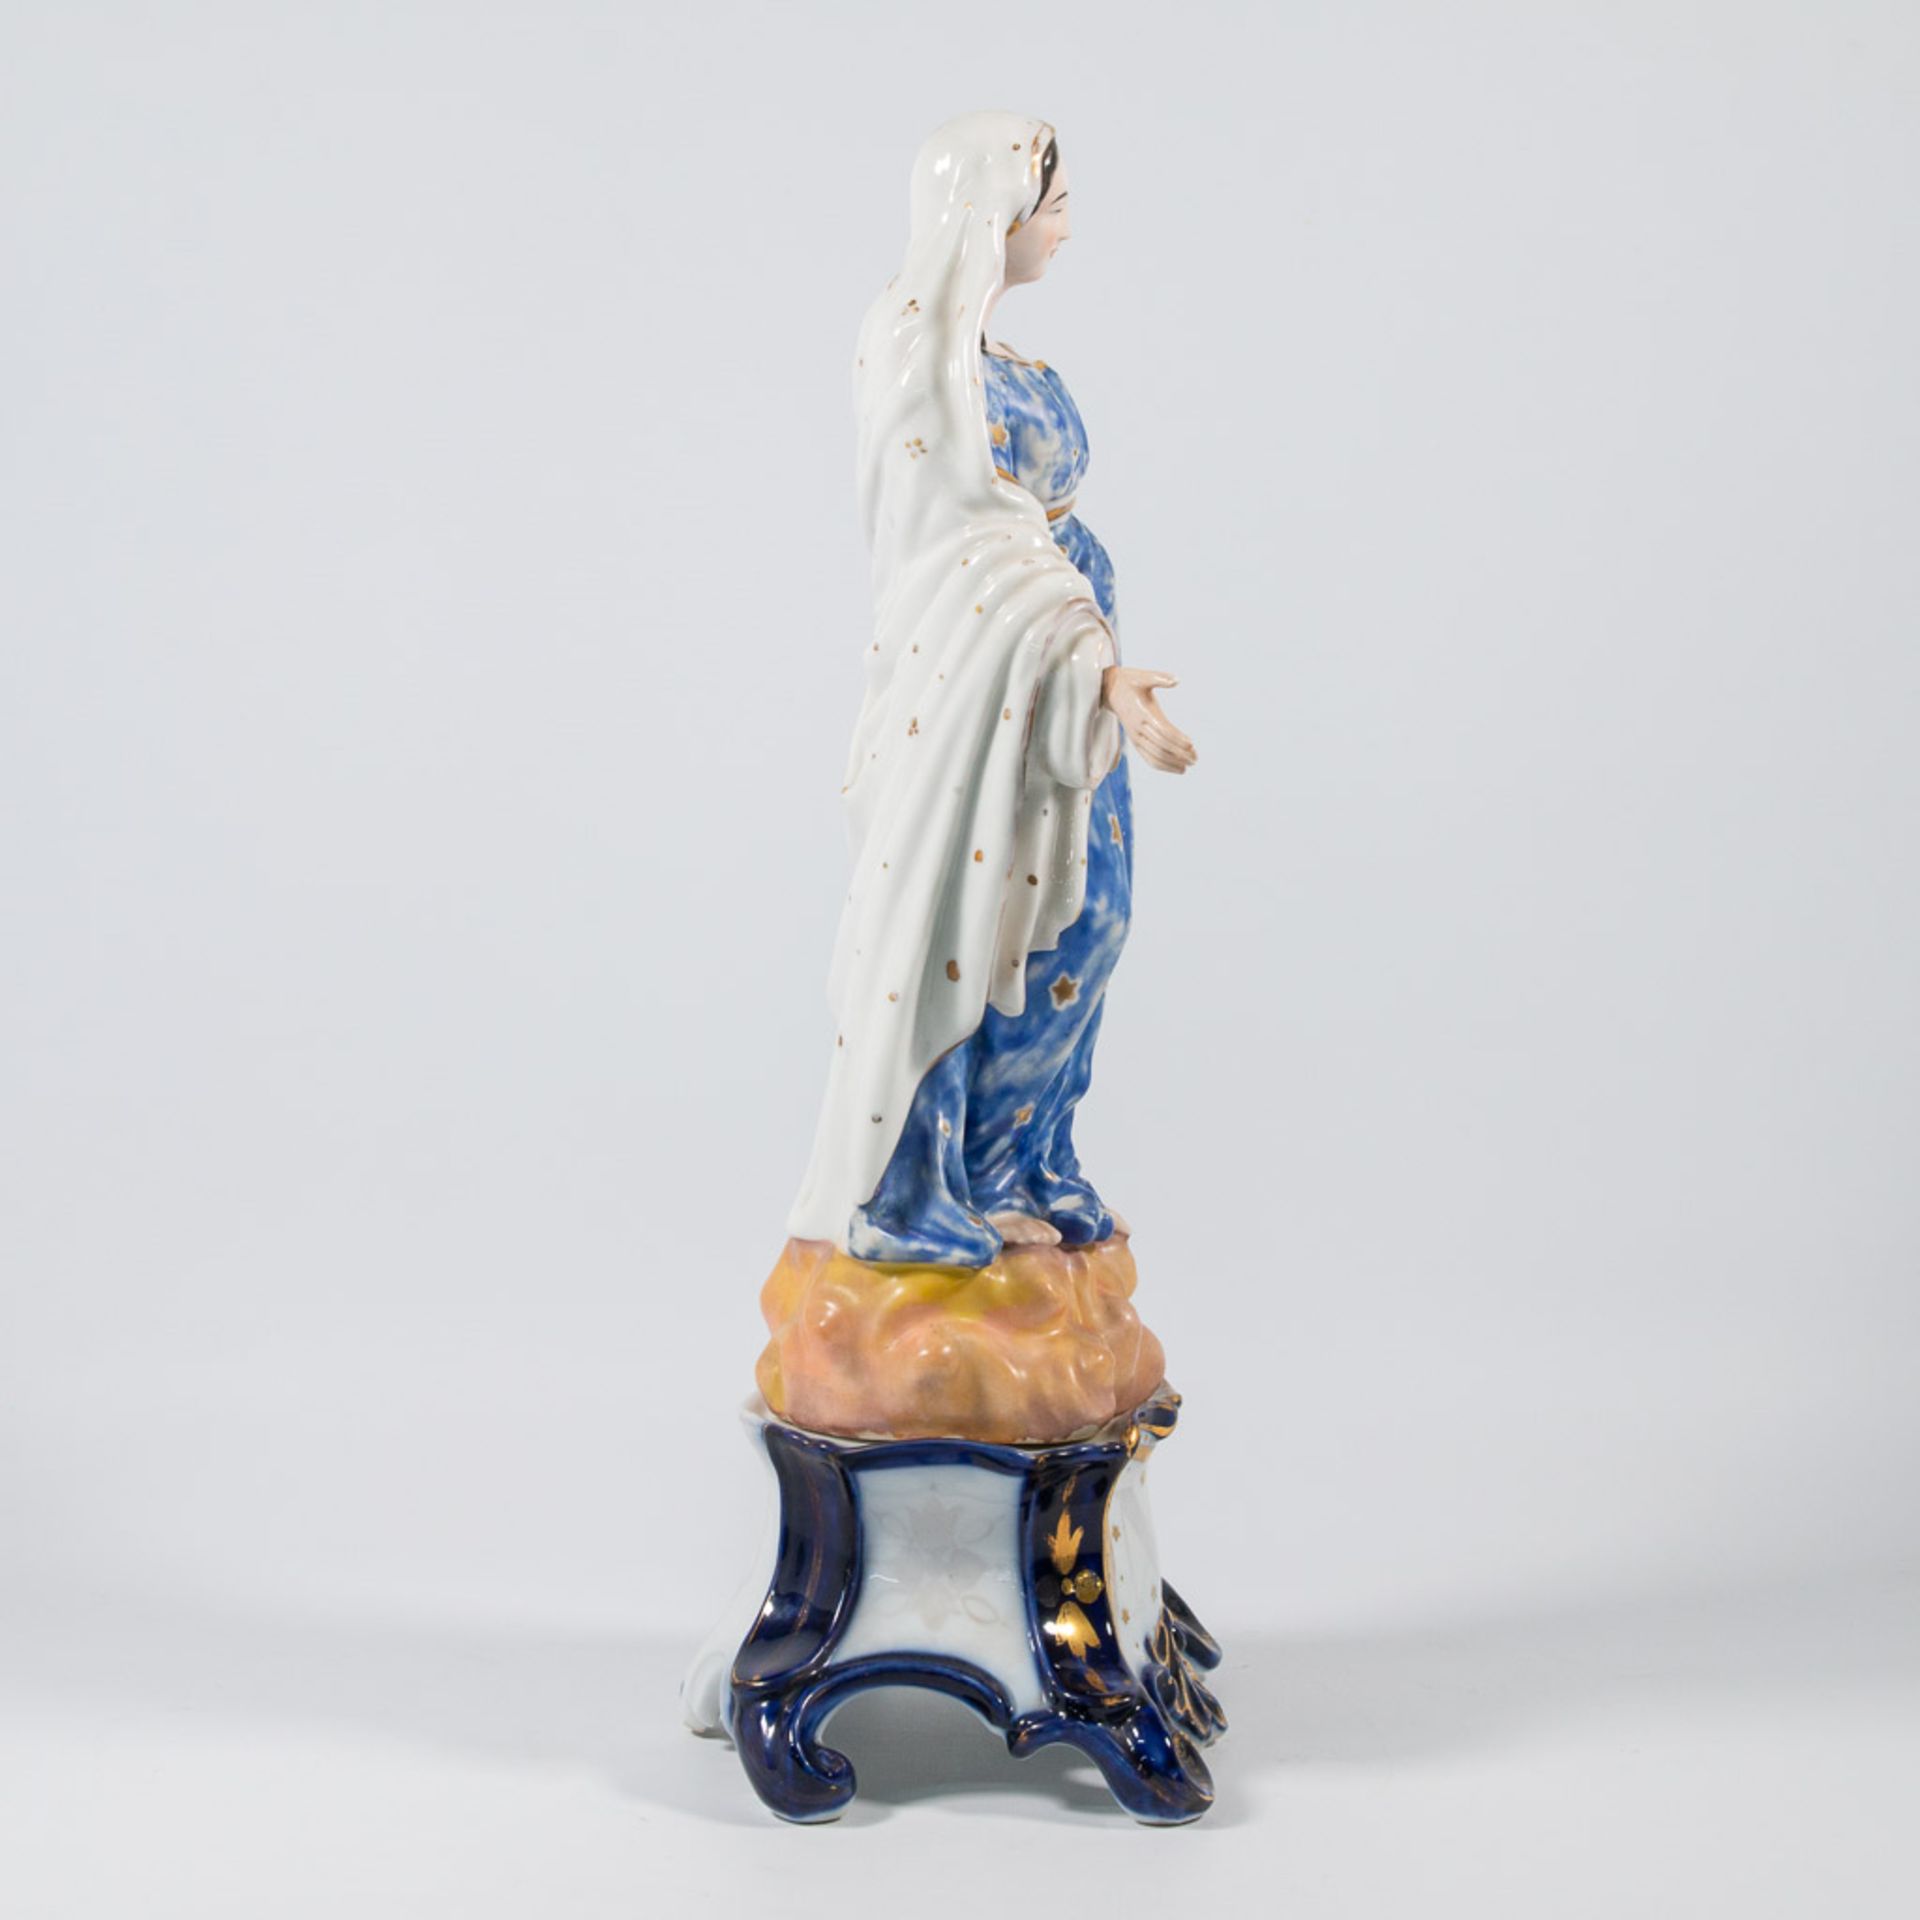 Madonna made of porcelain, 19th century - Image 5 of 18